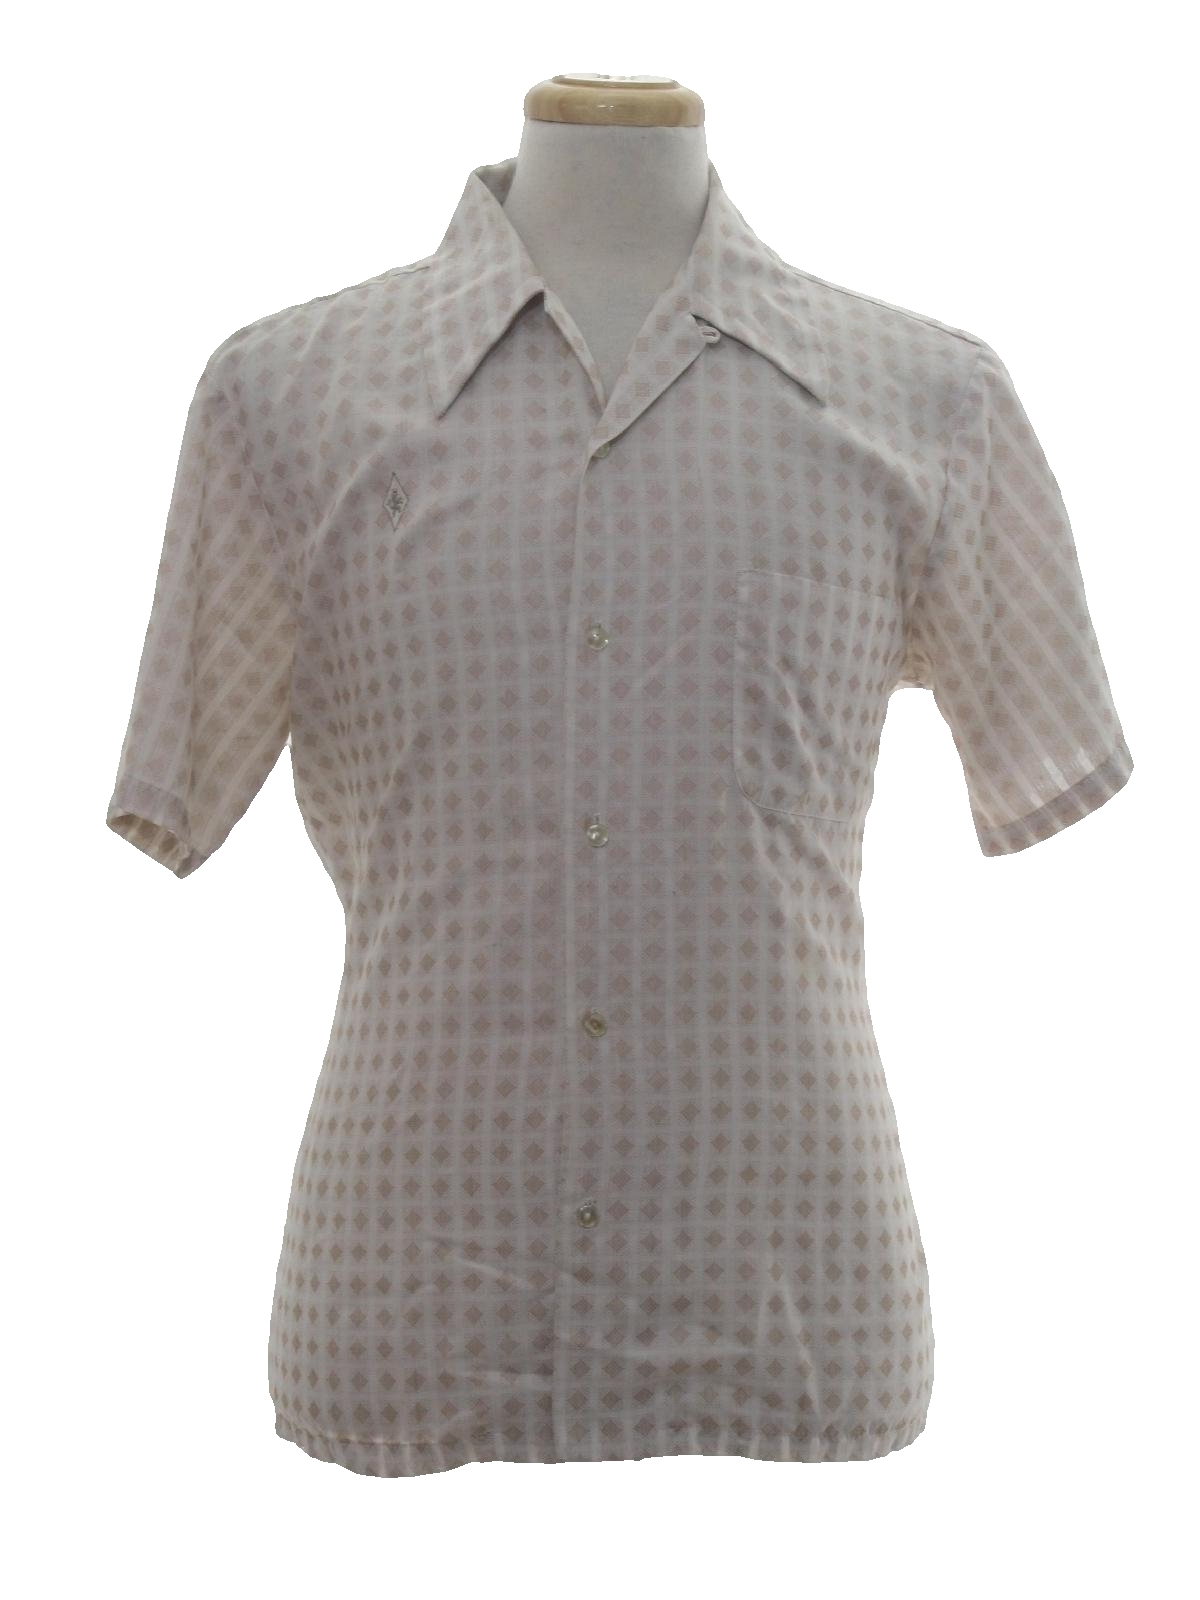 Retro Seventies Shirt: 70s -care label- Mens white background polyester ...